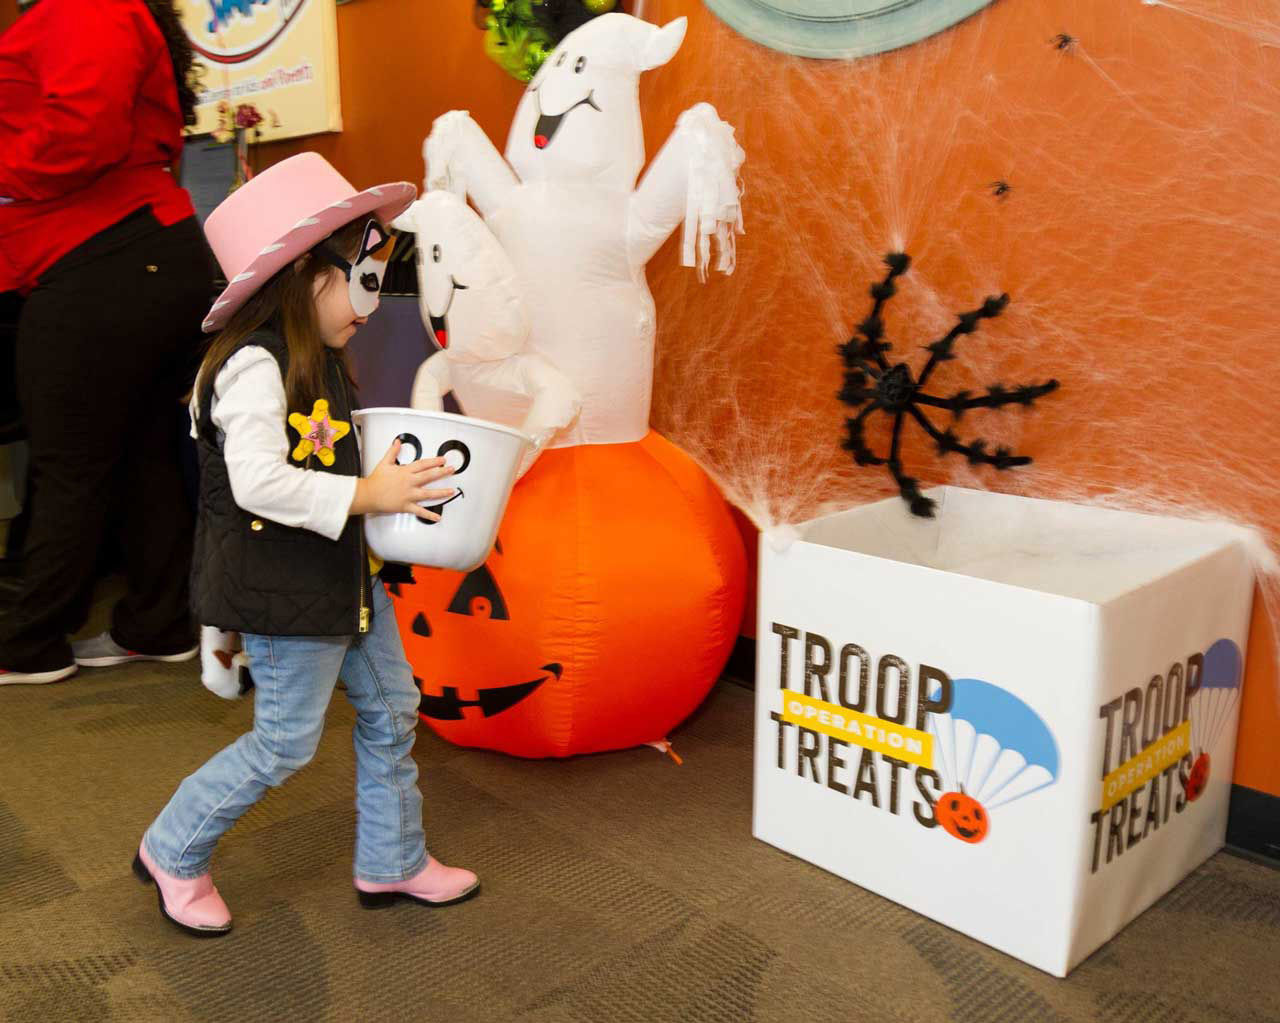 The program is open to all children and families, not just Kool Smiles patients. (Courtesy Operation Troop Treats)